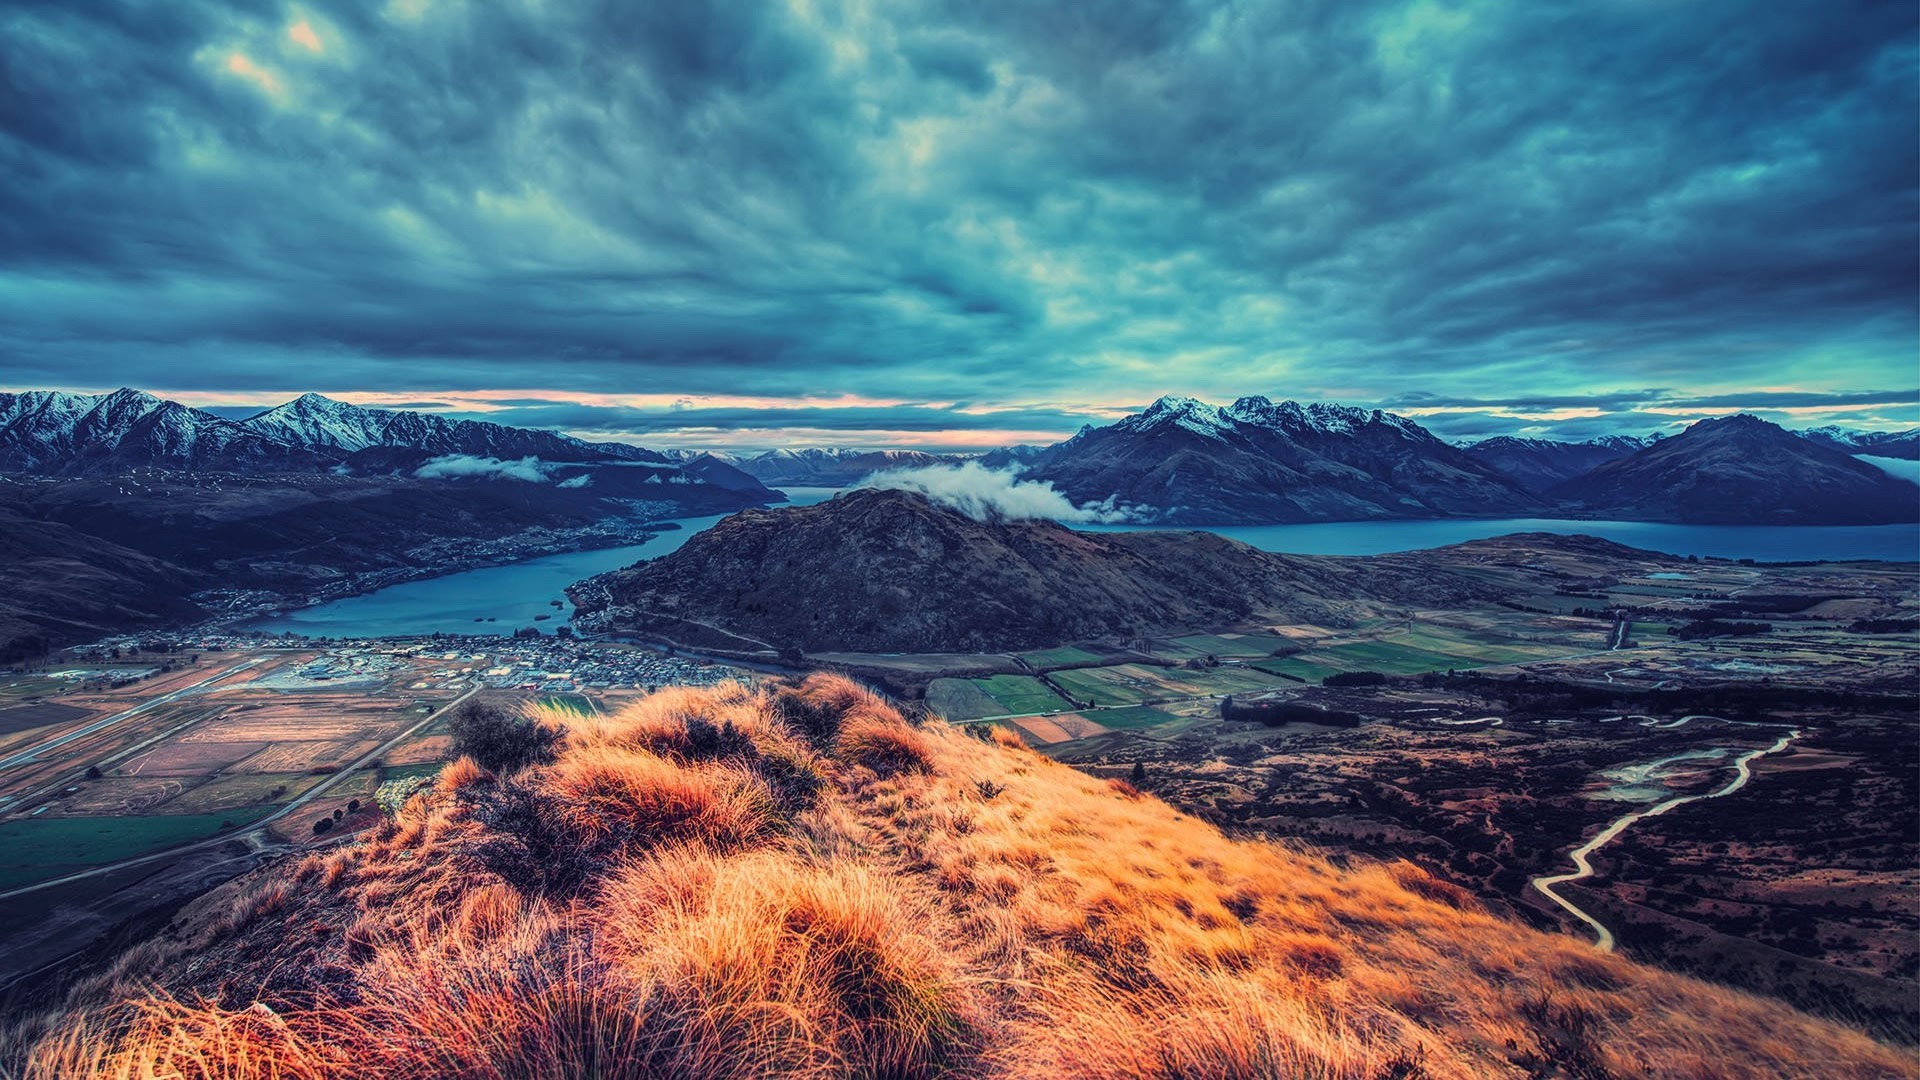 General 1920x1080 landscape nature mountains HDR New Zealand sky lake